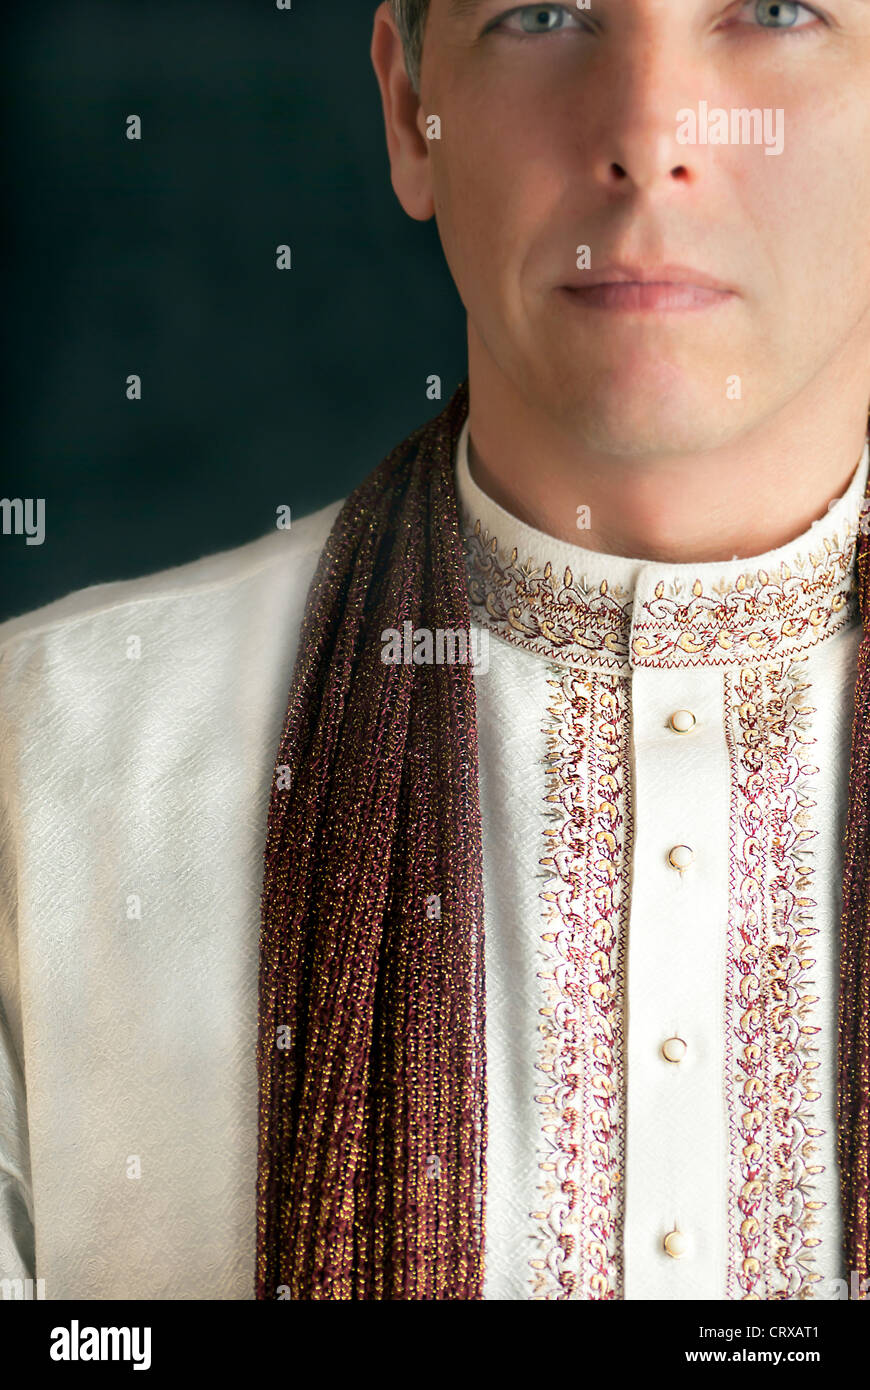 A close-up shot of a peaceful man in traditional Indian clothing. Stock Photo